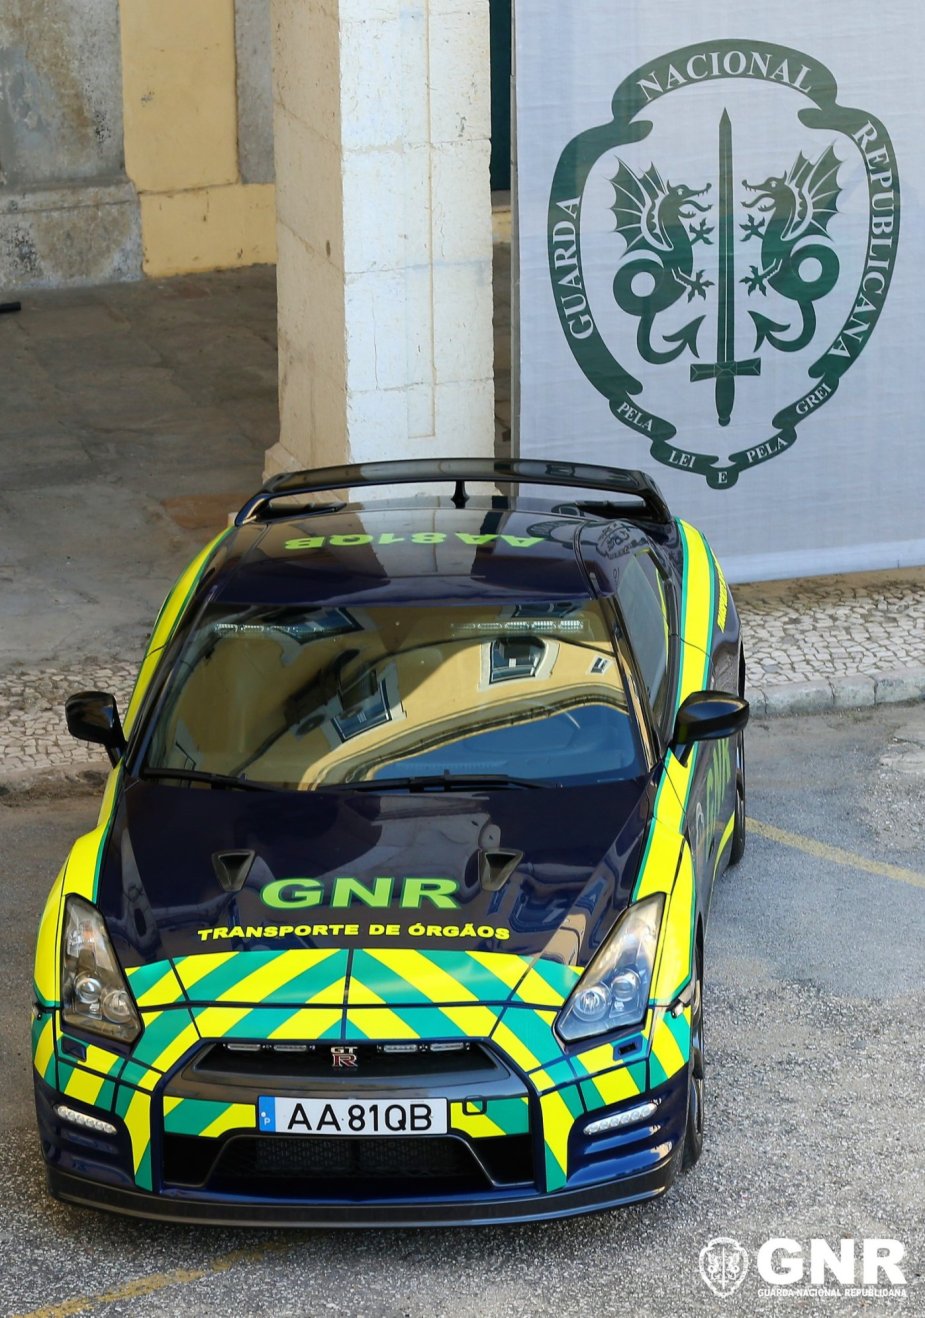 An image of a siezed Nissan GT-R utilized by police in Portugal.